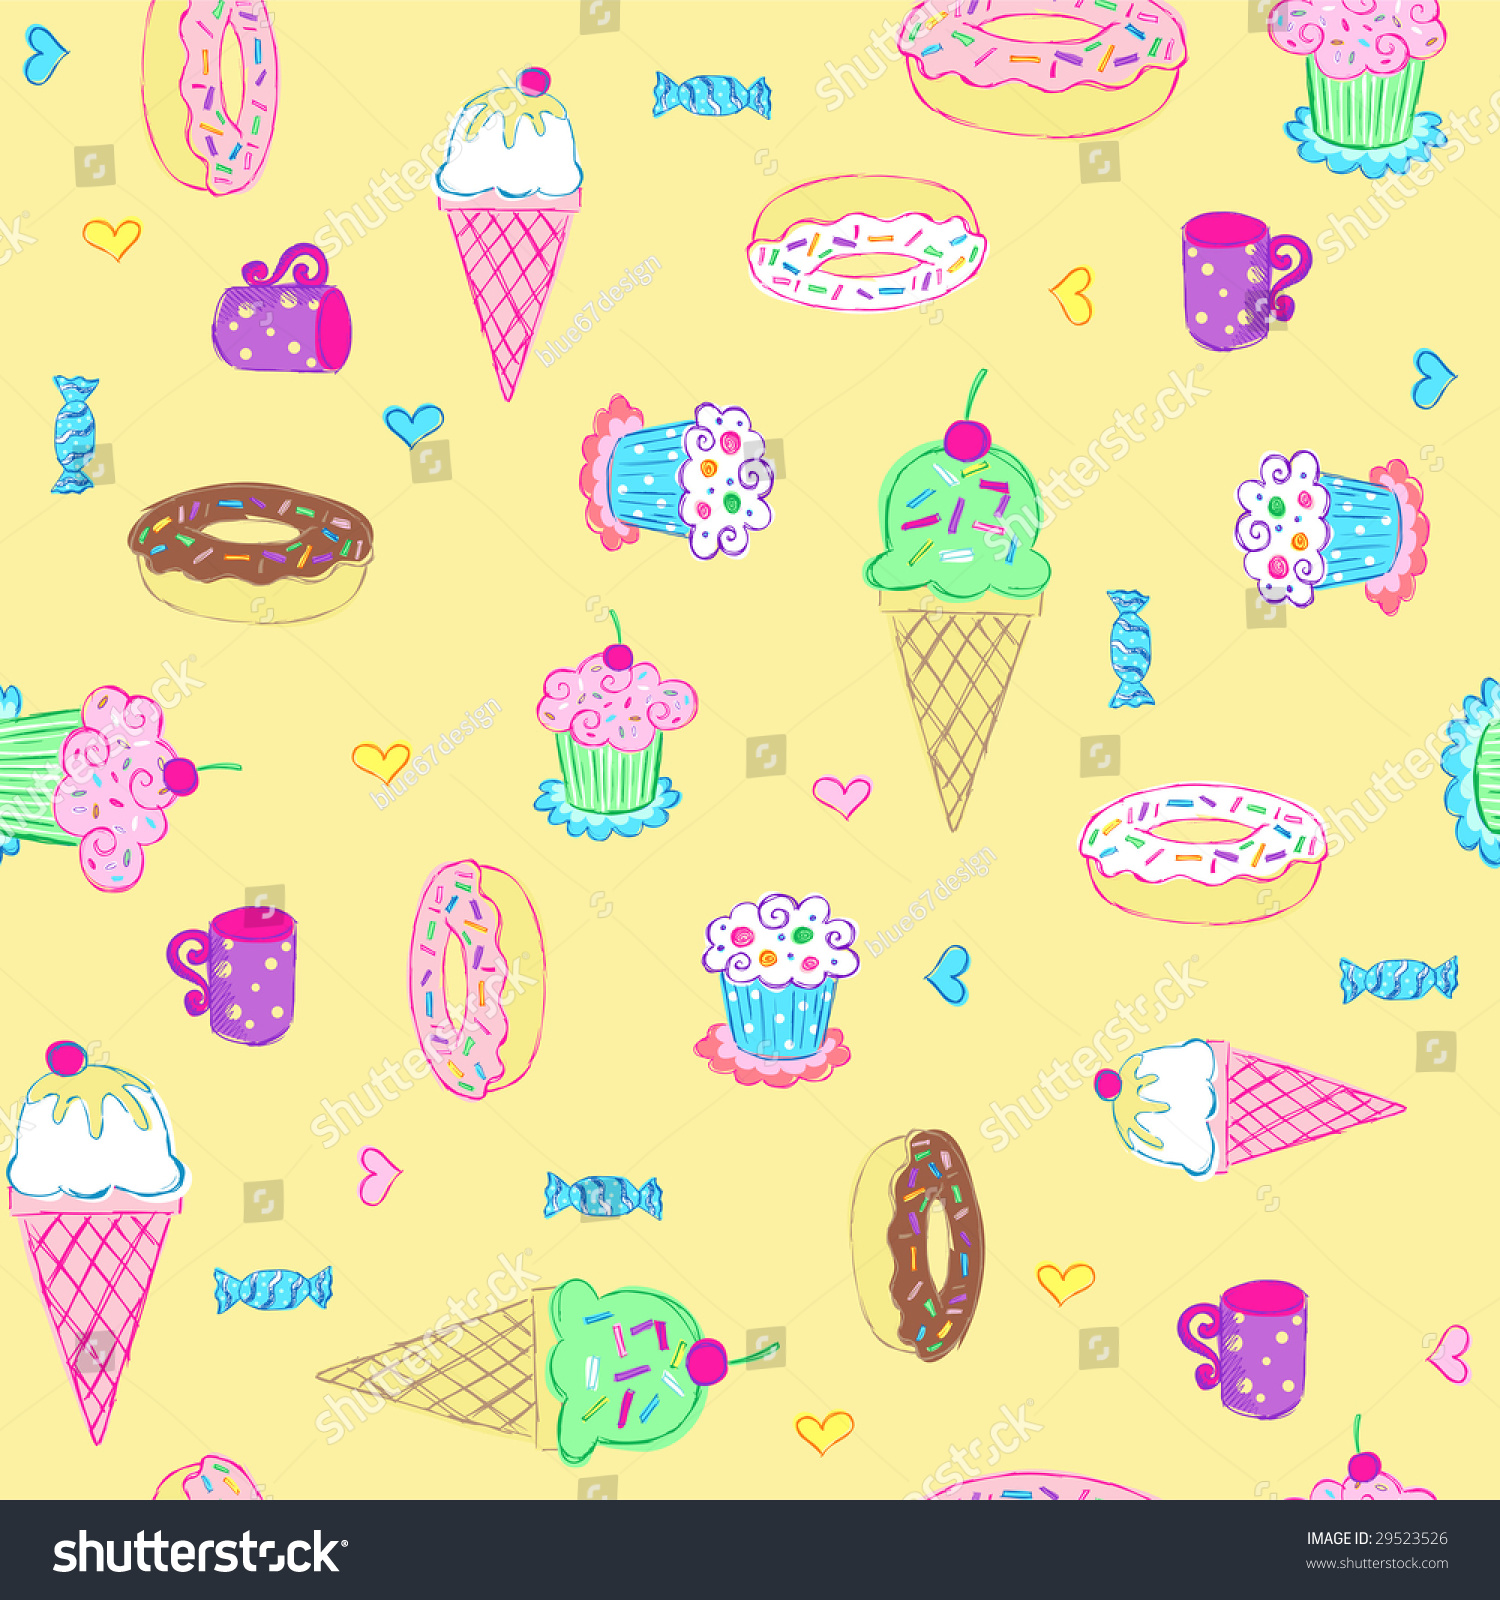 Desserts and Sweets Seamless Repeat Pattern Vector Illustration #29523526